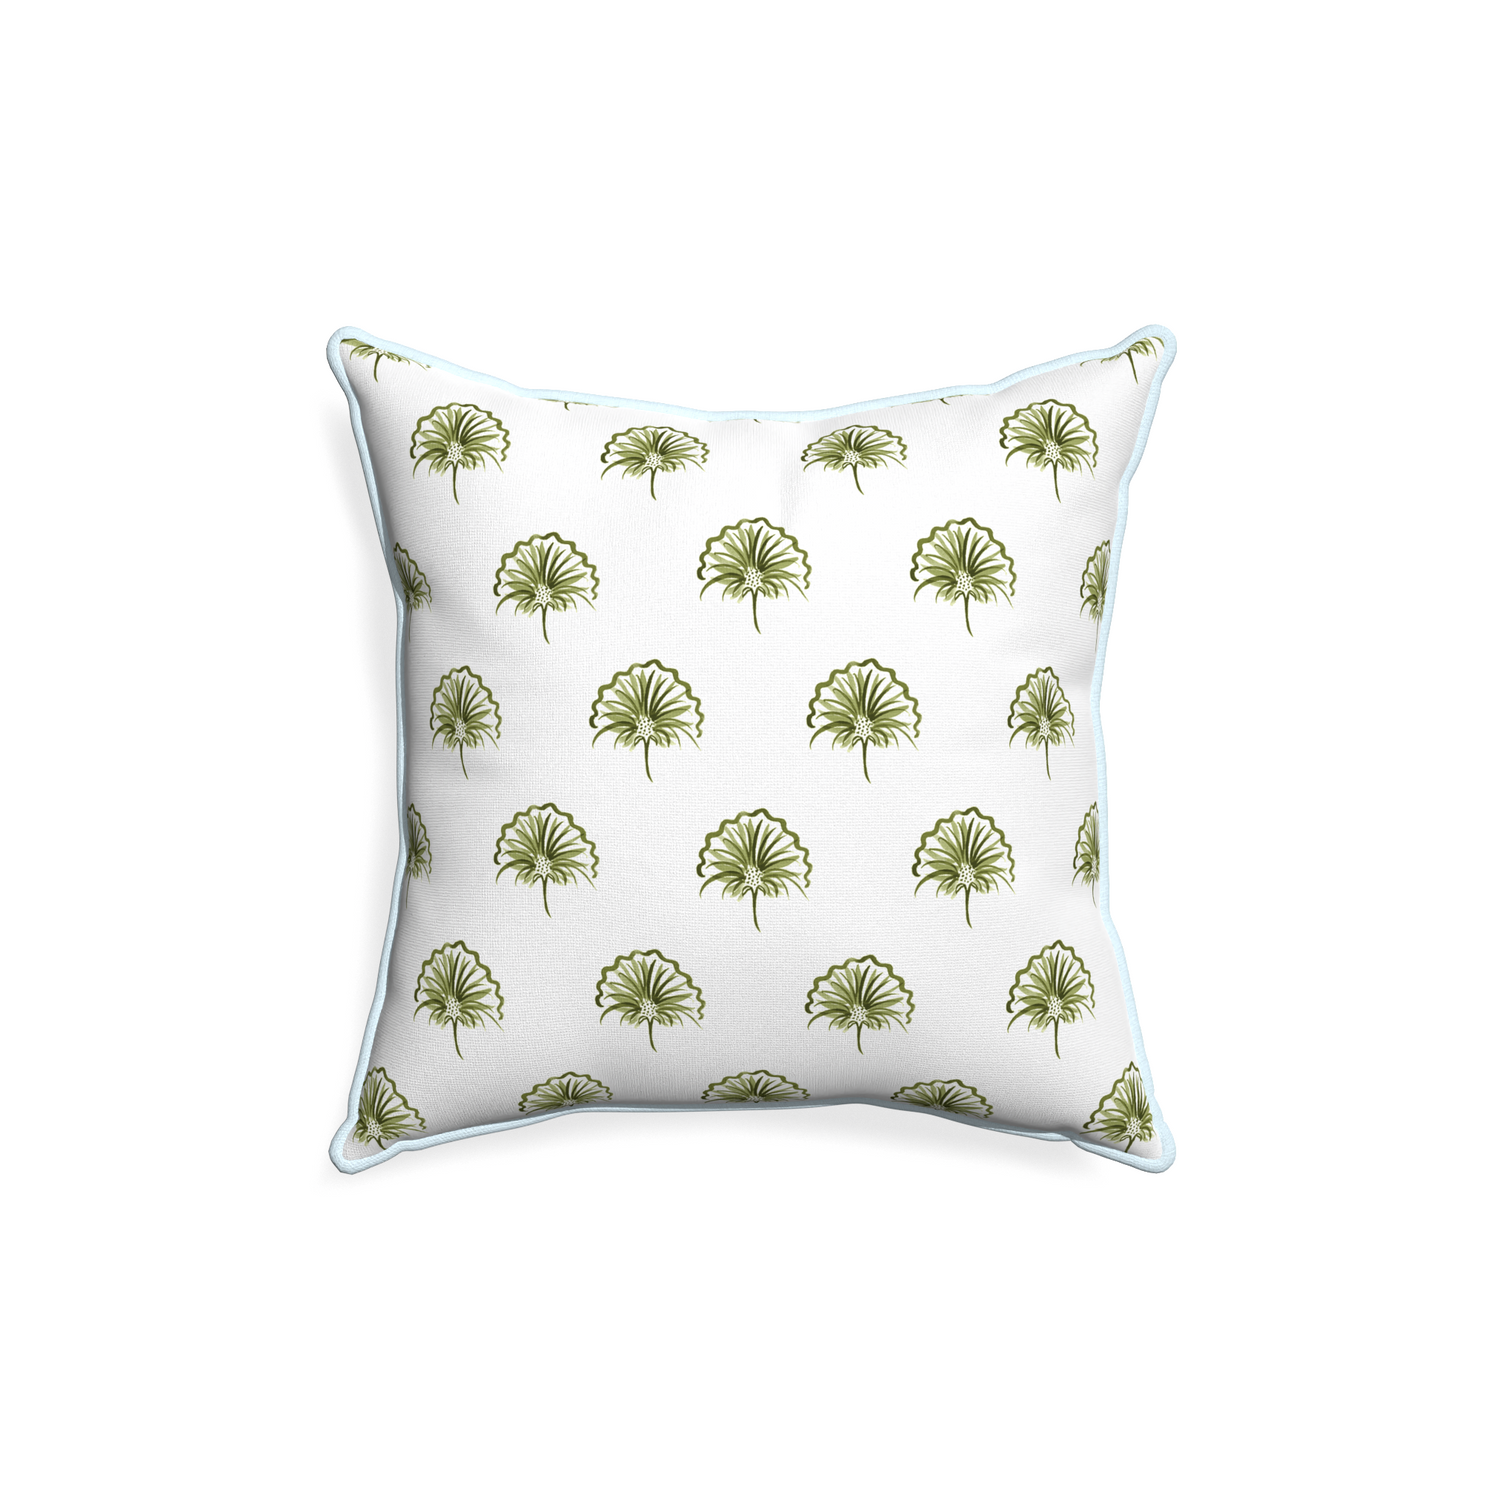 18-square penelope moss custom green floralpillow with powder piping on white background